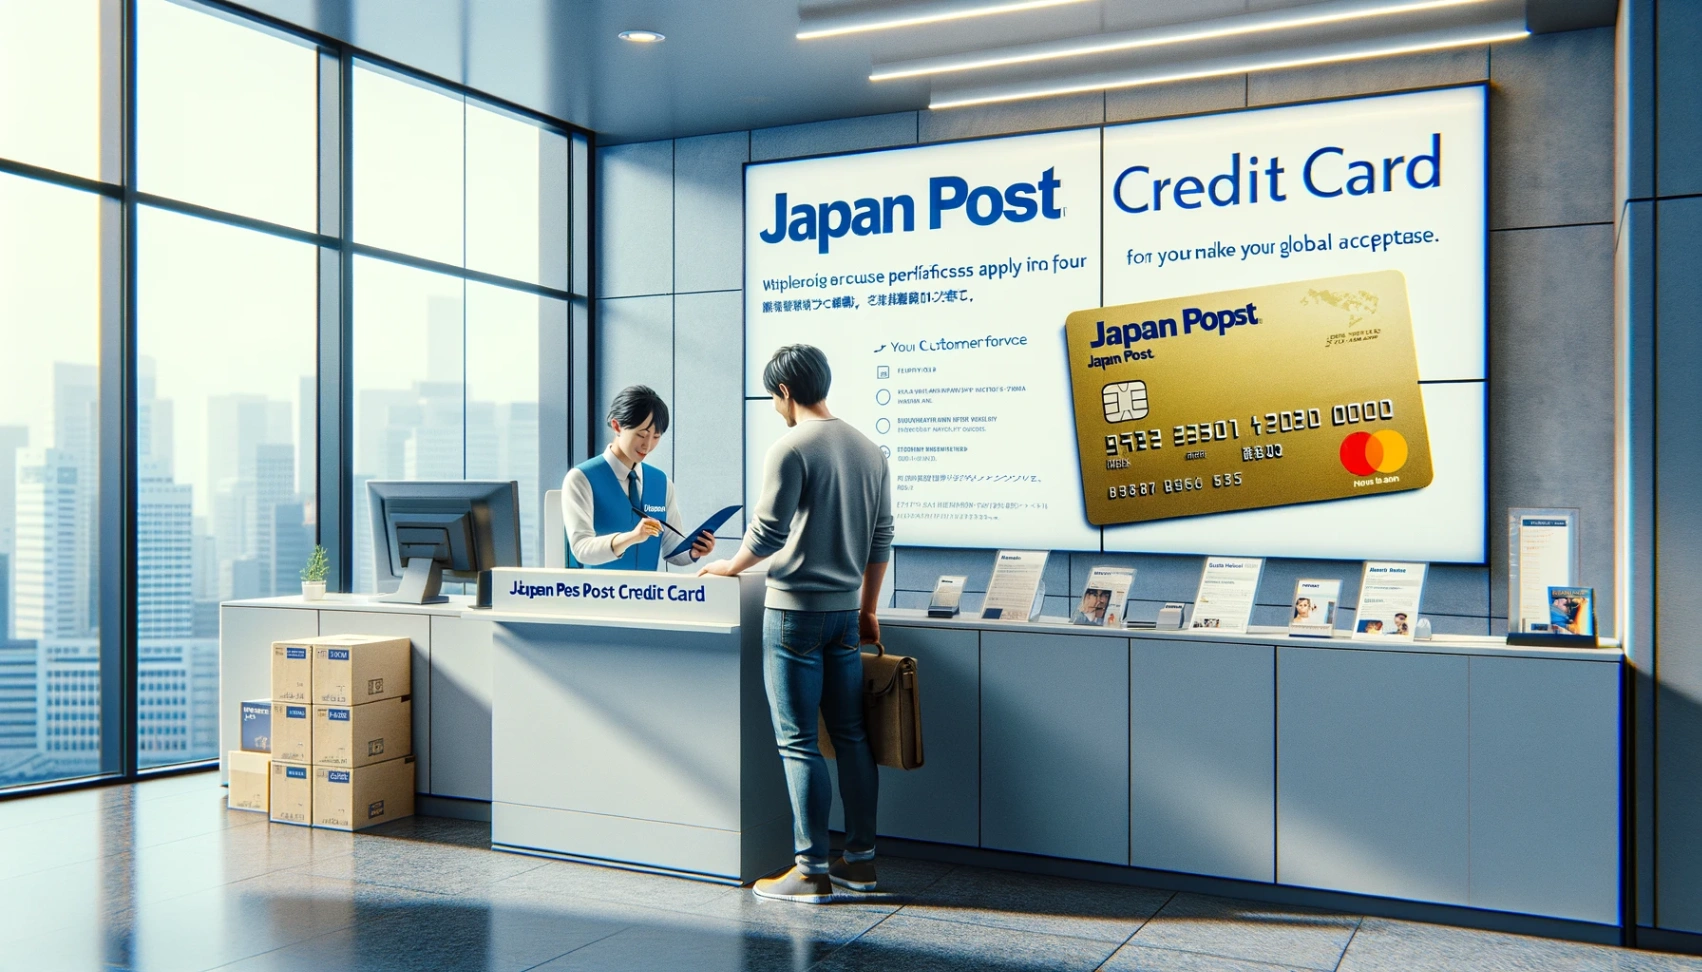 Japan Post Visa Credit Card - Learn How to Apply